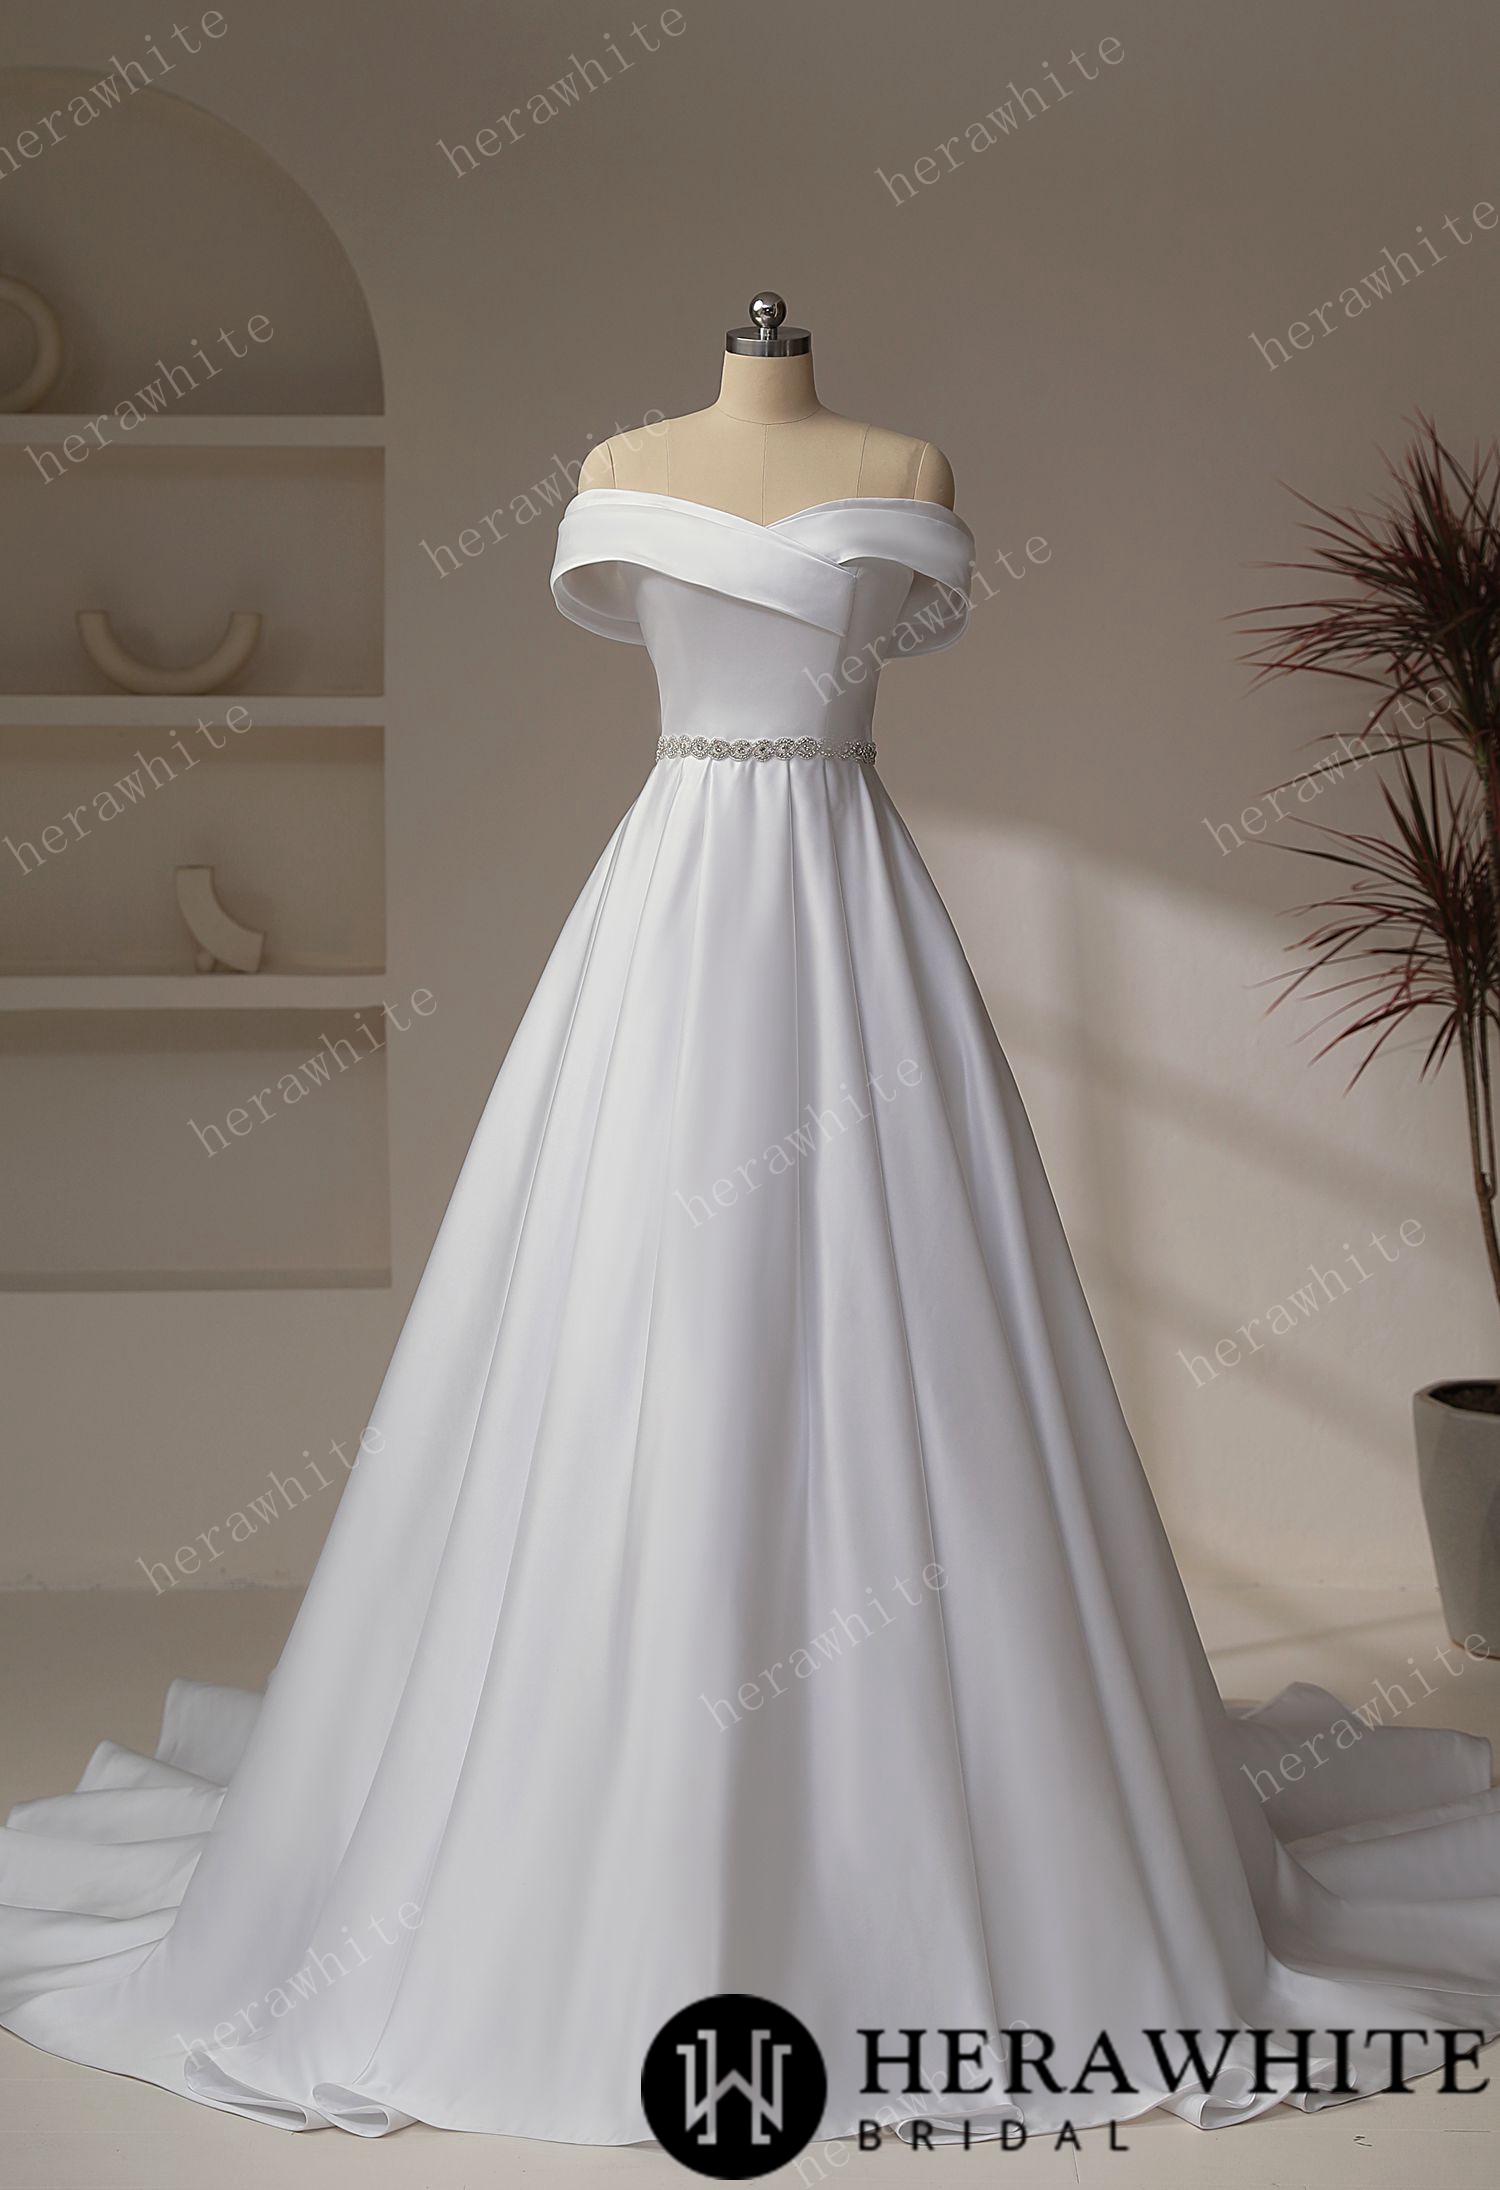 Exquisite Off-Shoulder Satin Wedding Dress with Crystal Waistband